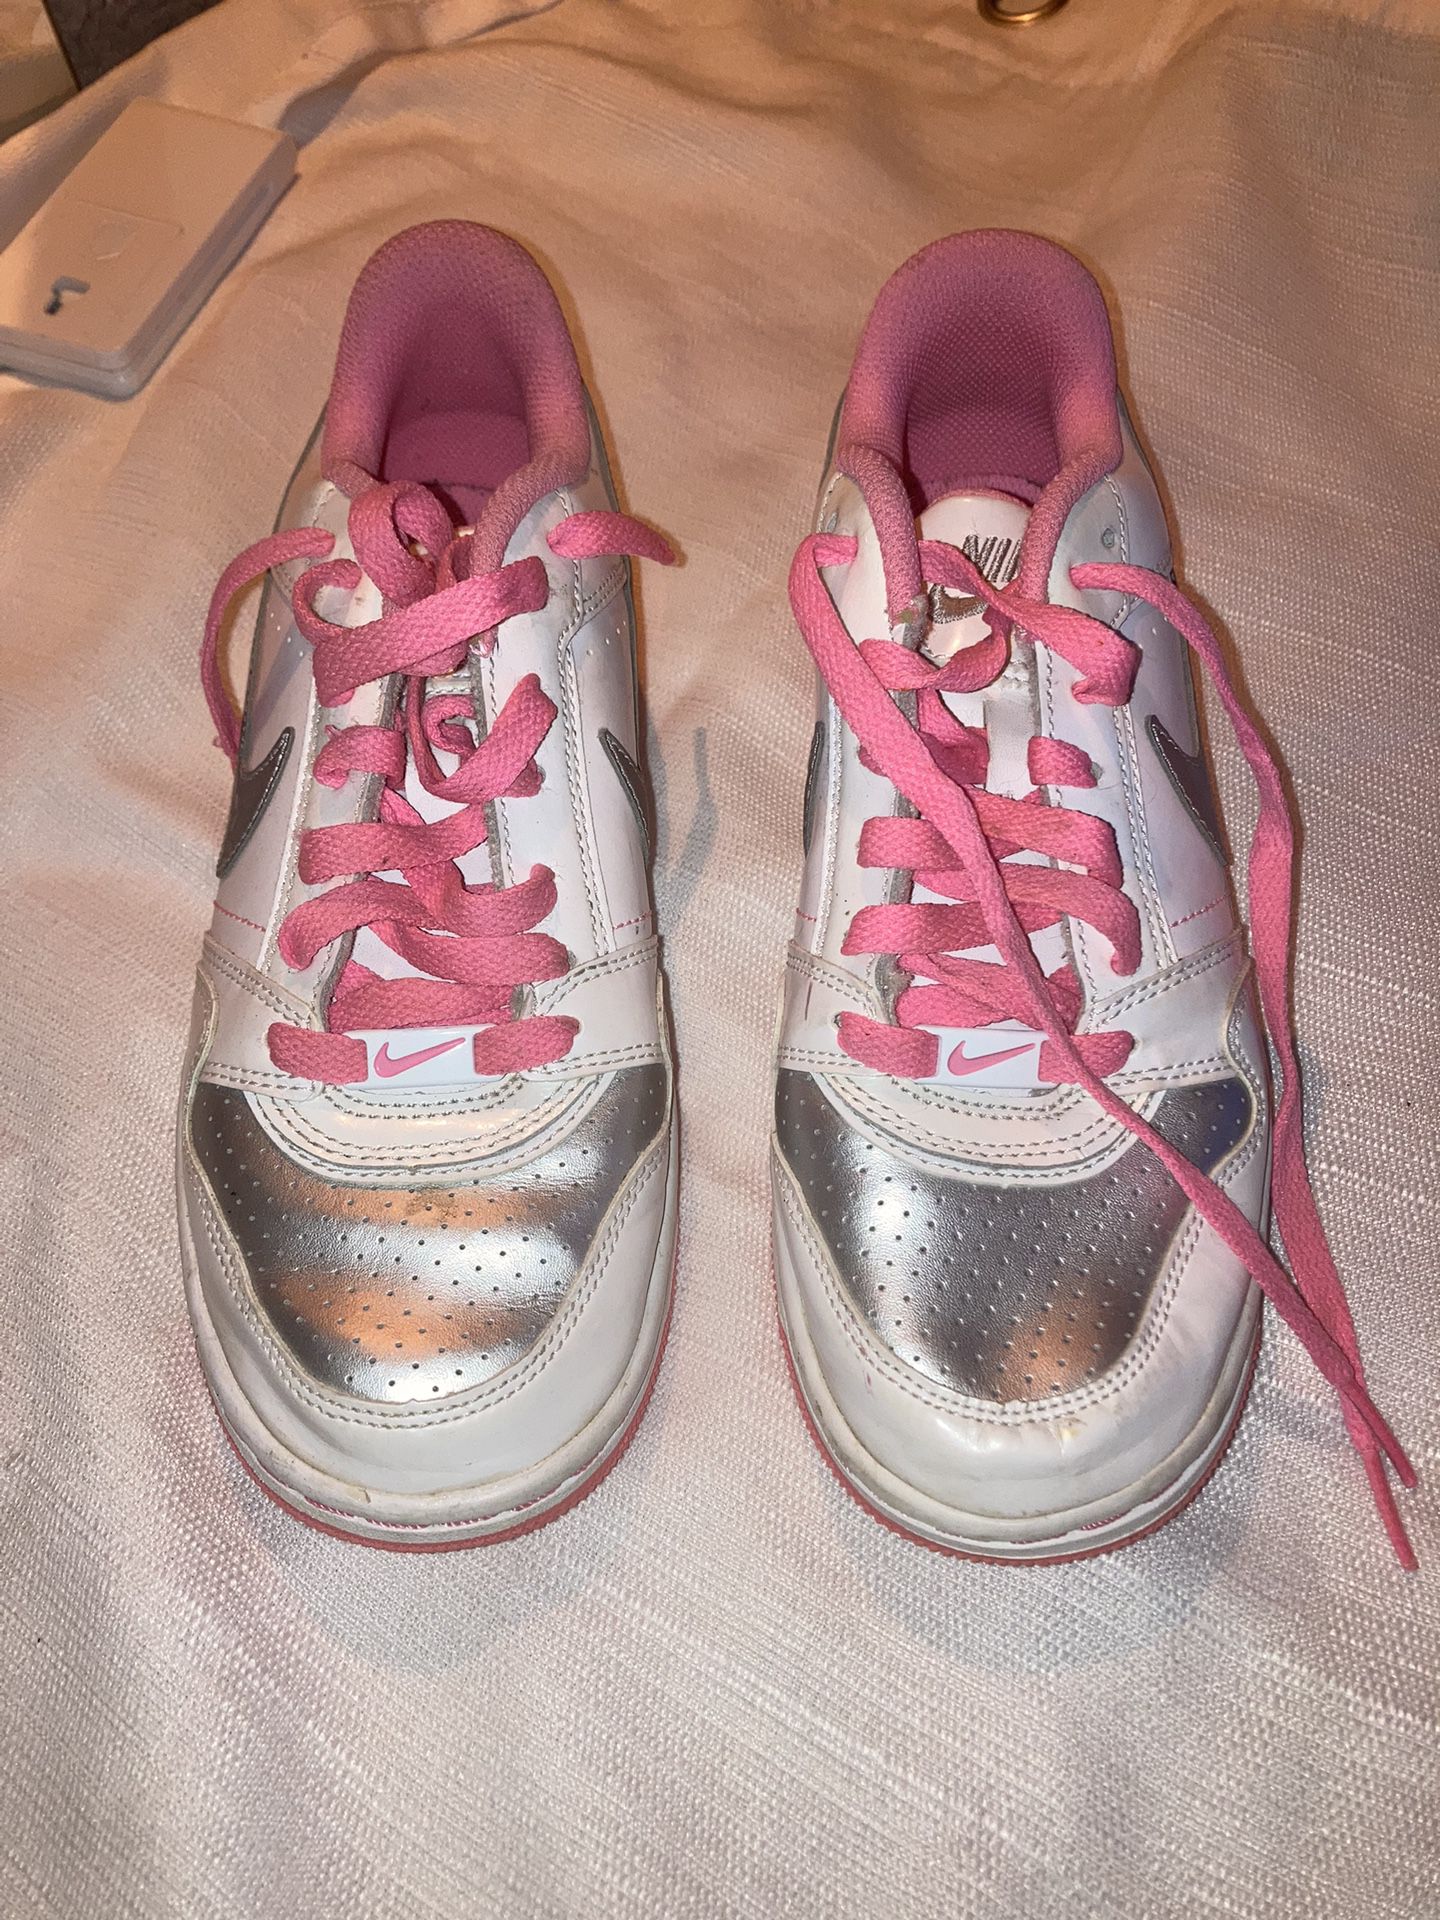 Pink And Silver Nike Shoes